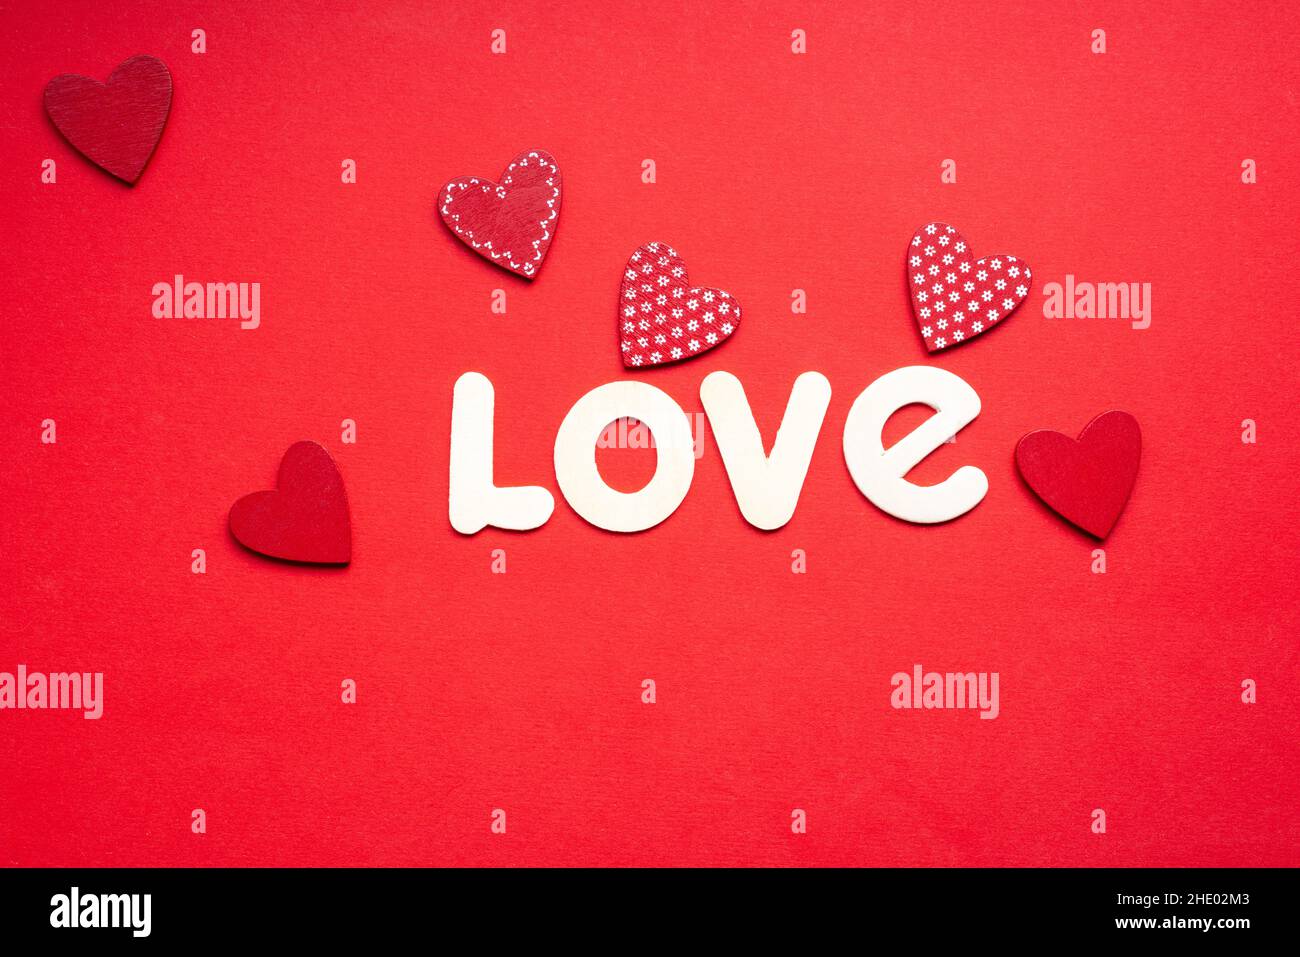 the word love on red background with small red hearts for valentines day Stock Photo